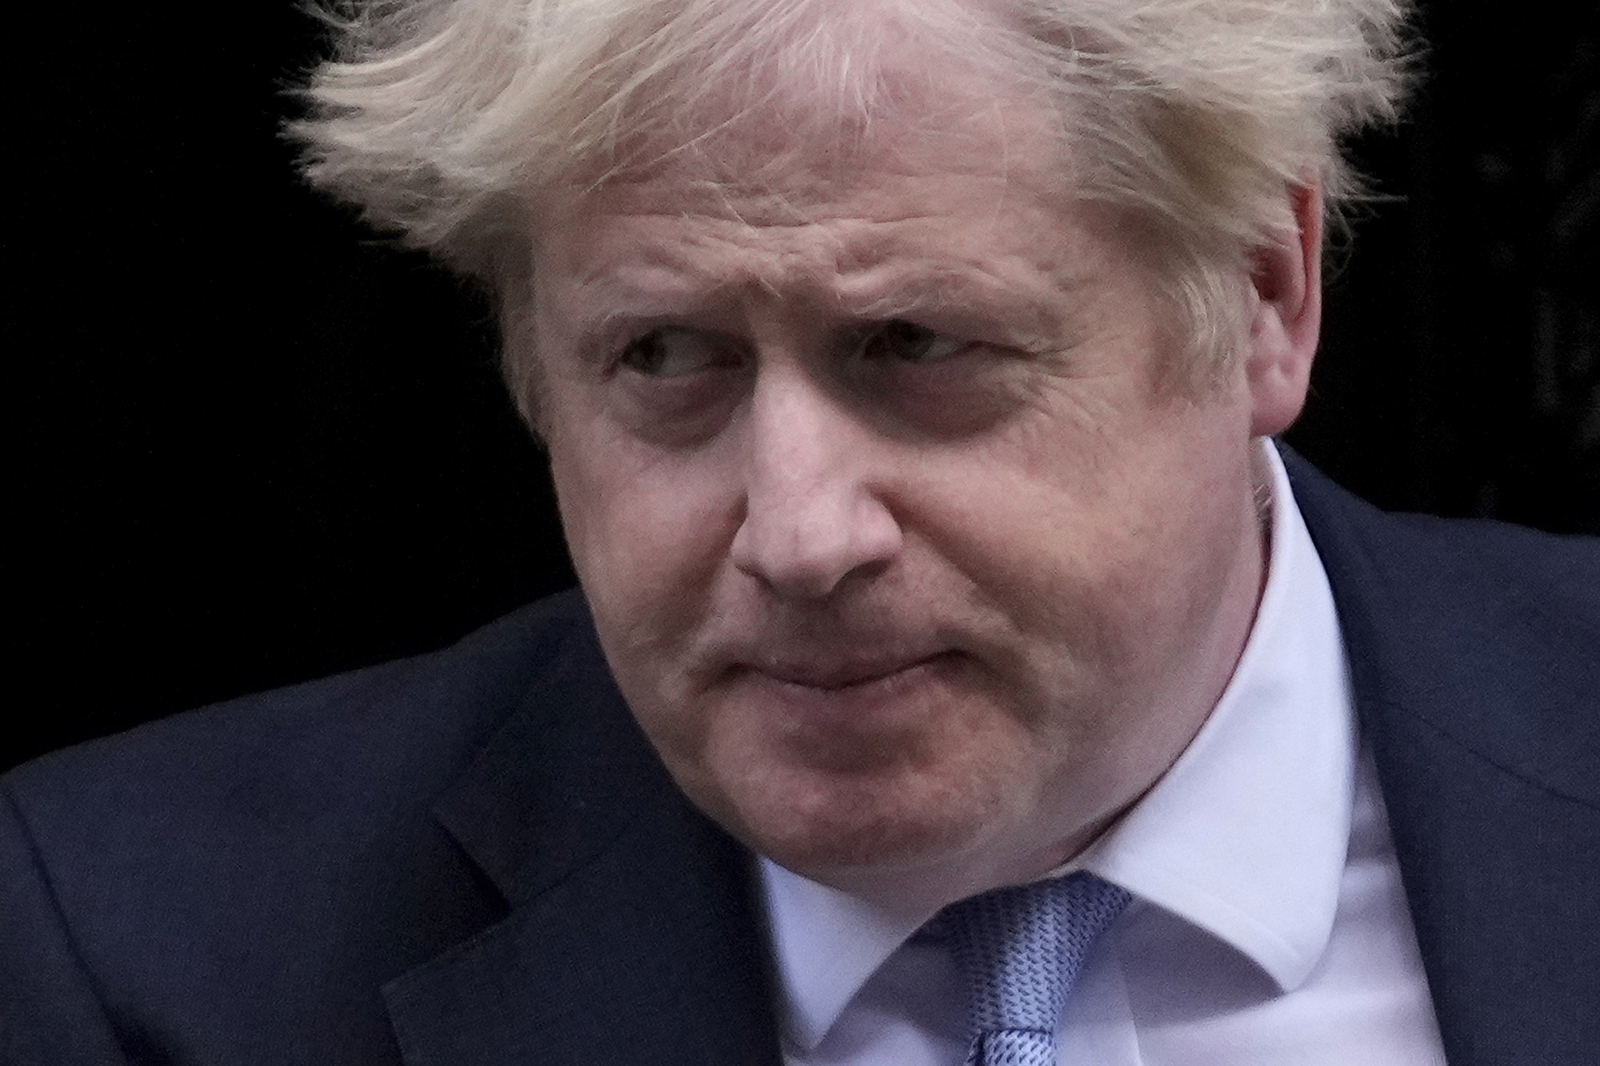 Boris Johnson leaving 10 Downing Street to attend the weekly Prime Minister's Questions at the Houses of Parliament, in London, on Feb. 9.